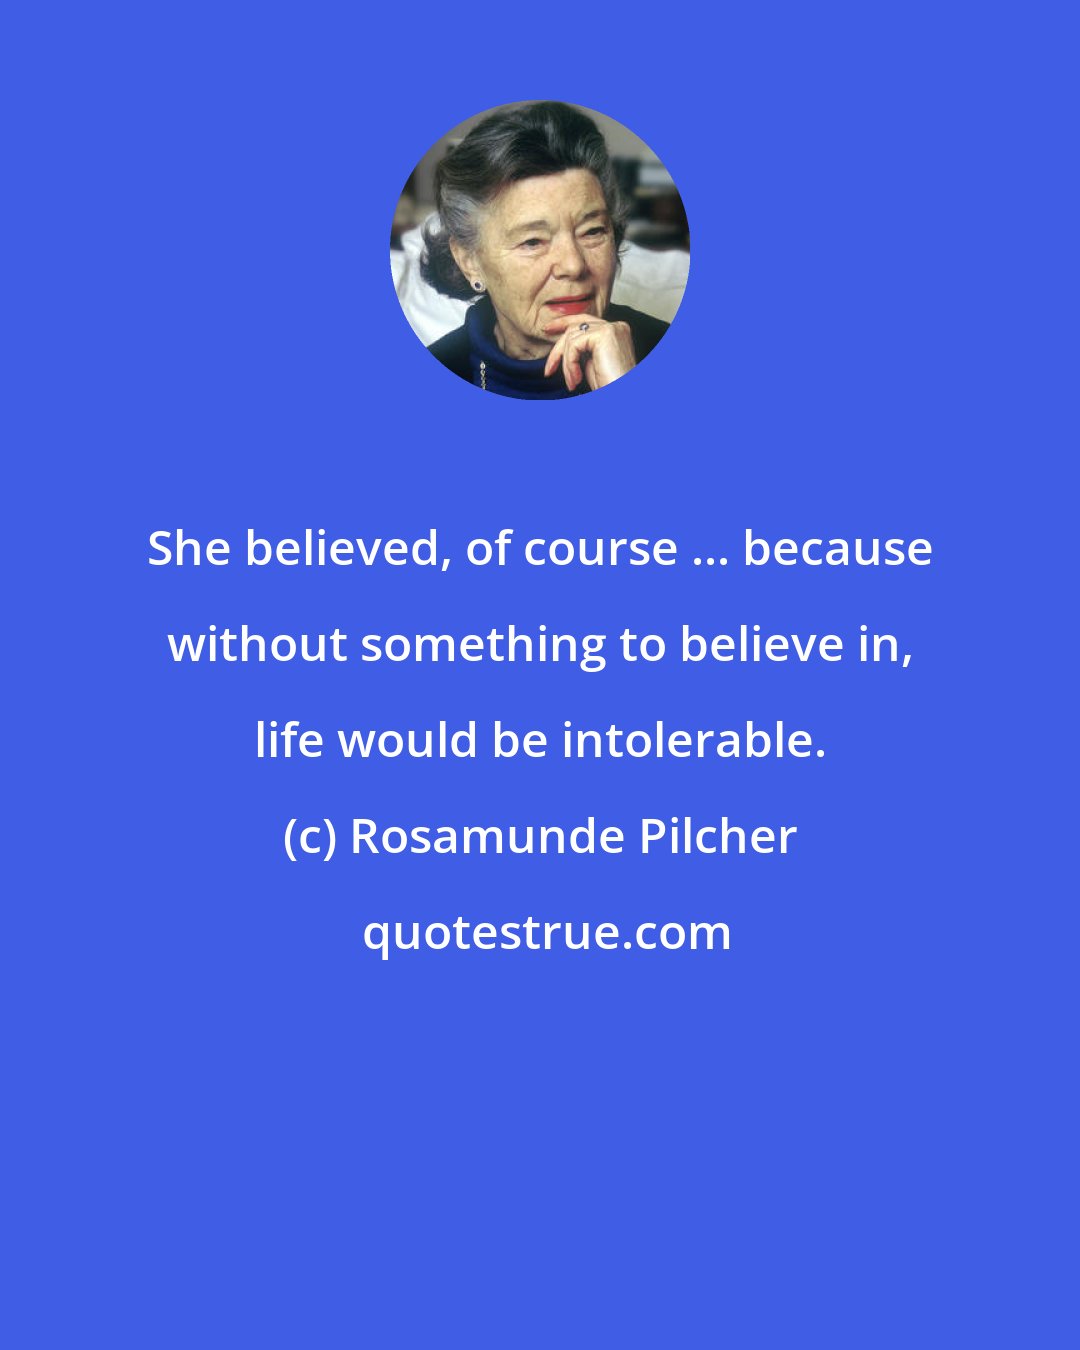 Rosamunde Pilcher: She believed, of course ... because without something to believe in, life would be intolerable.